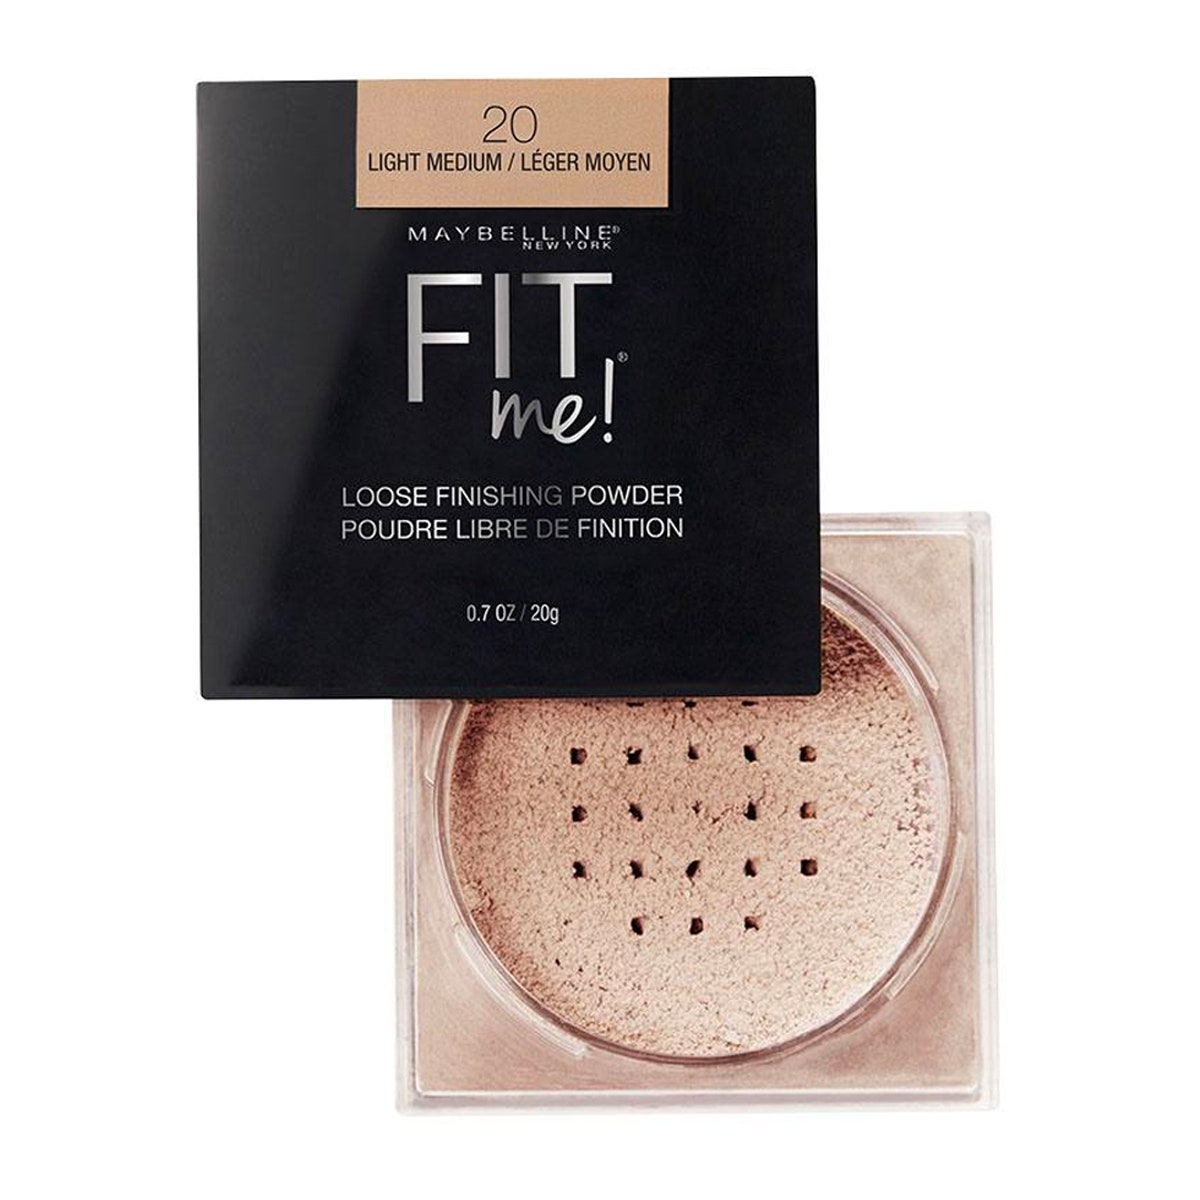 Maybelline Fit Me! Loose Finishing Powder. 